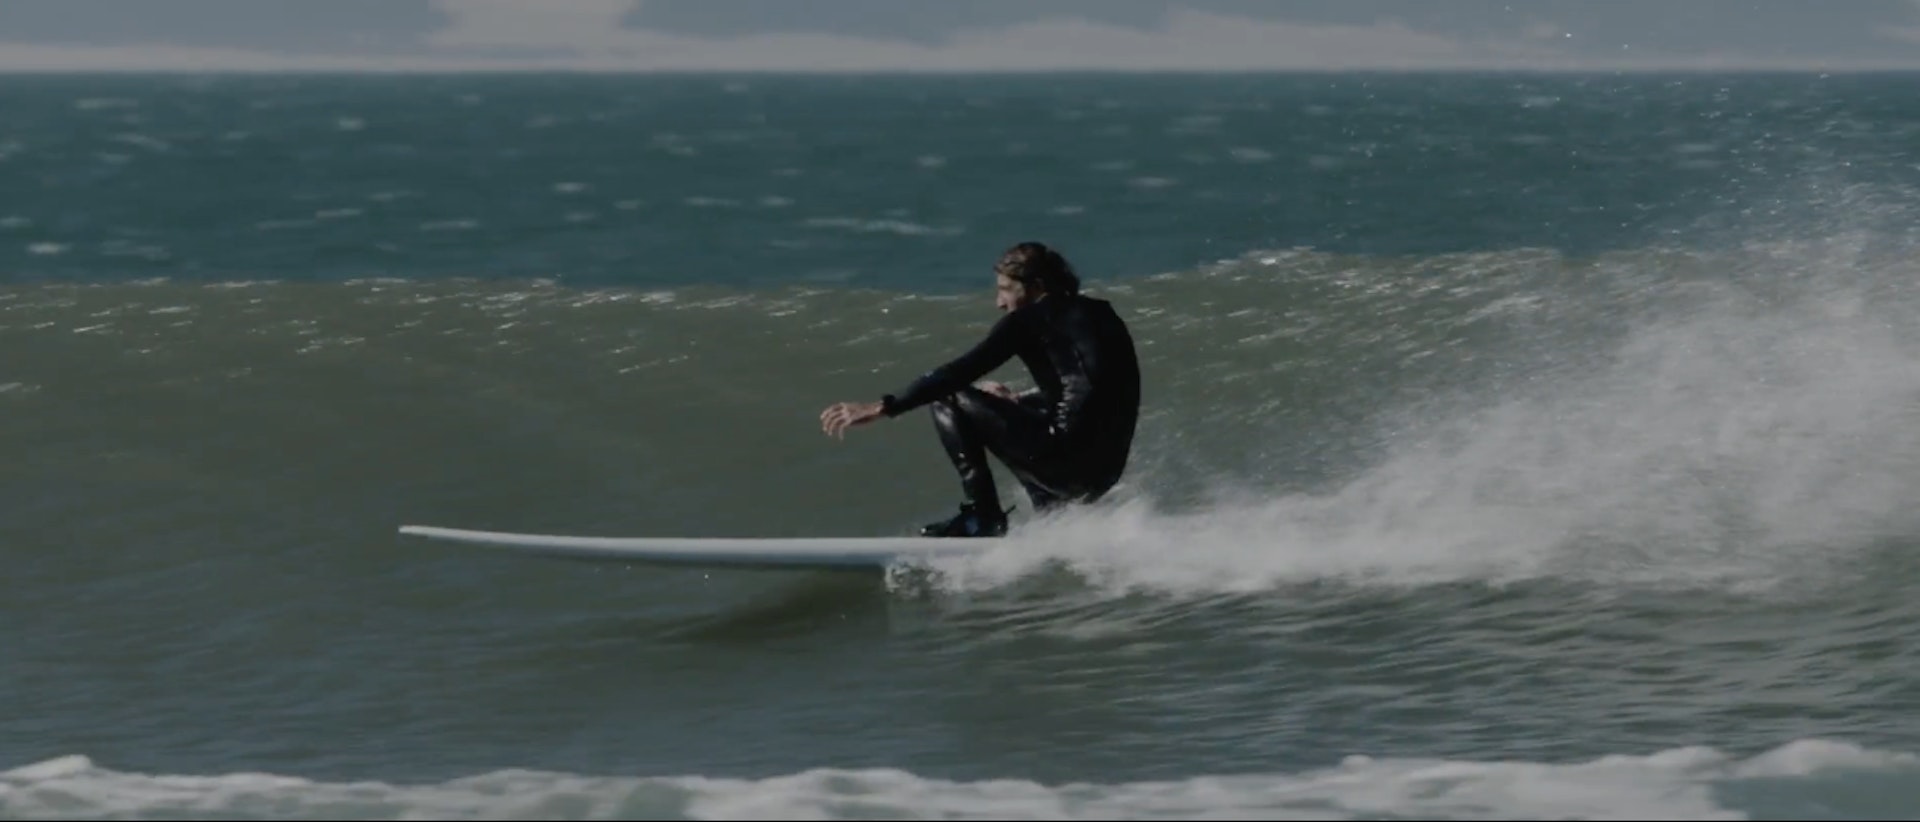 Video: Surfing icon Derek Hynd on embracing the wave philosophically